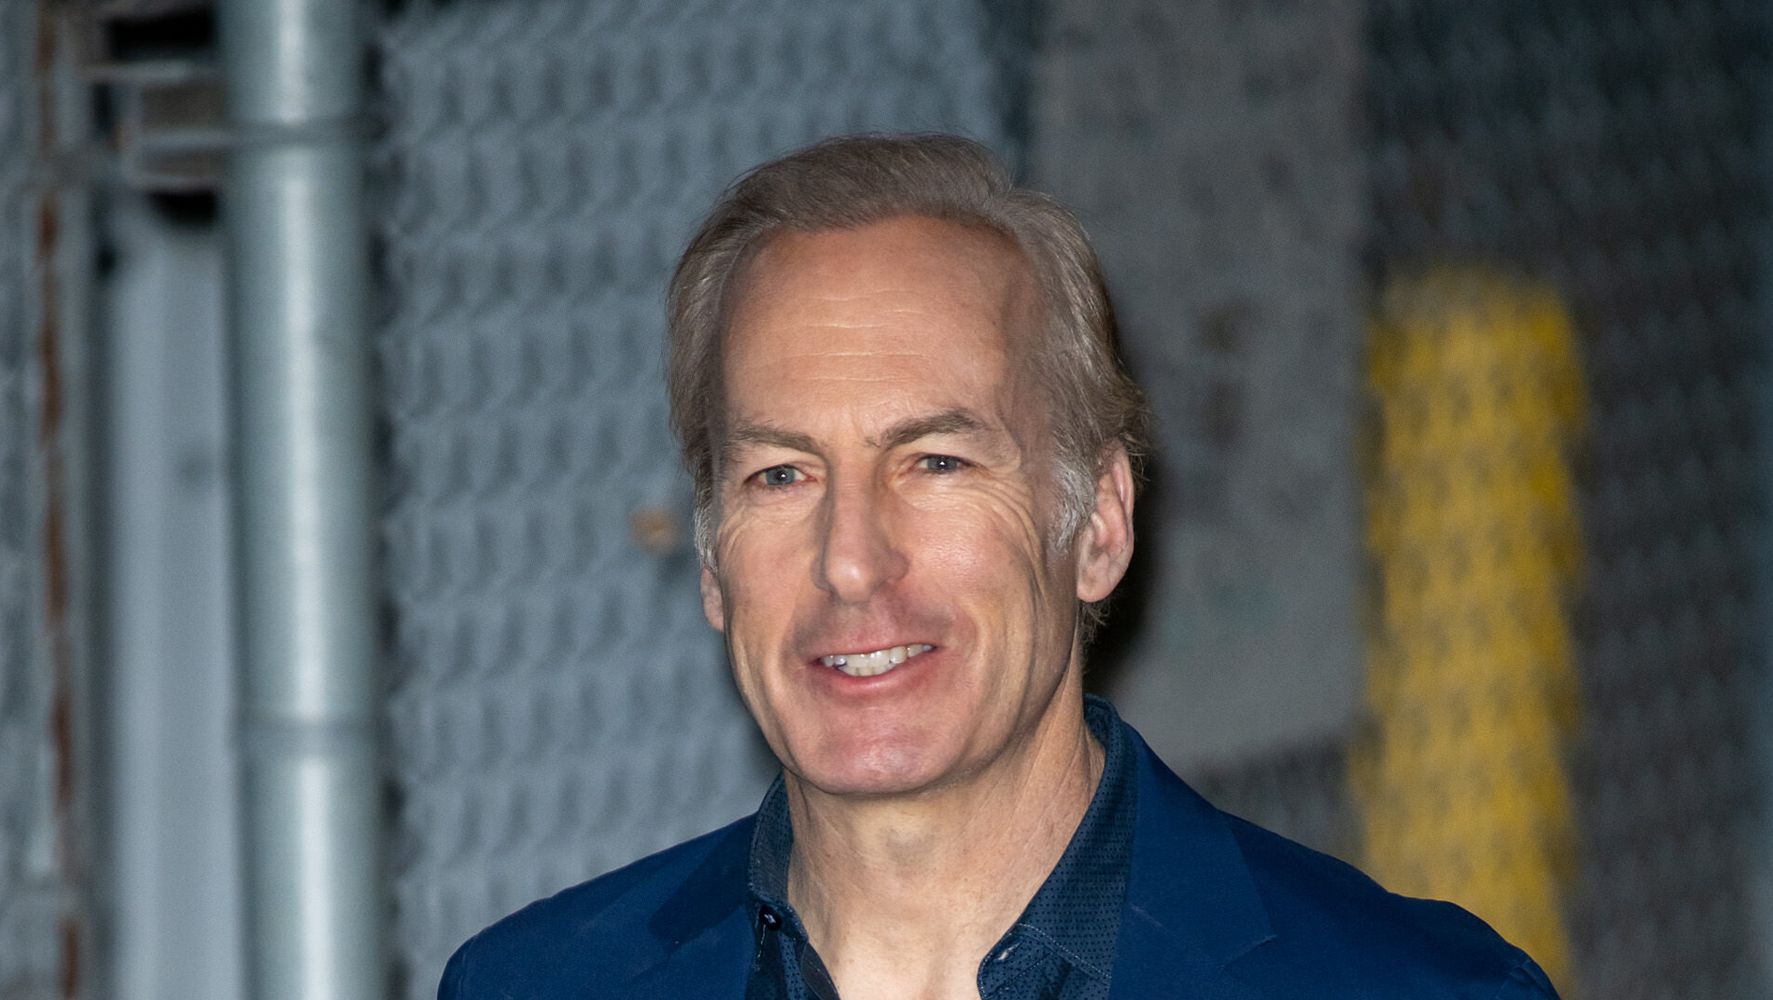 Bob Odenkirk Is 'Going To Take A Beat To Recover' From 'Small Heart Attack'